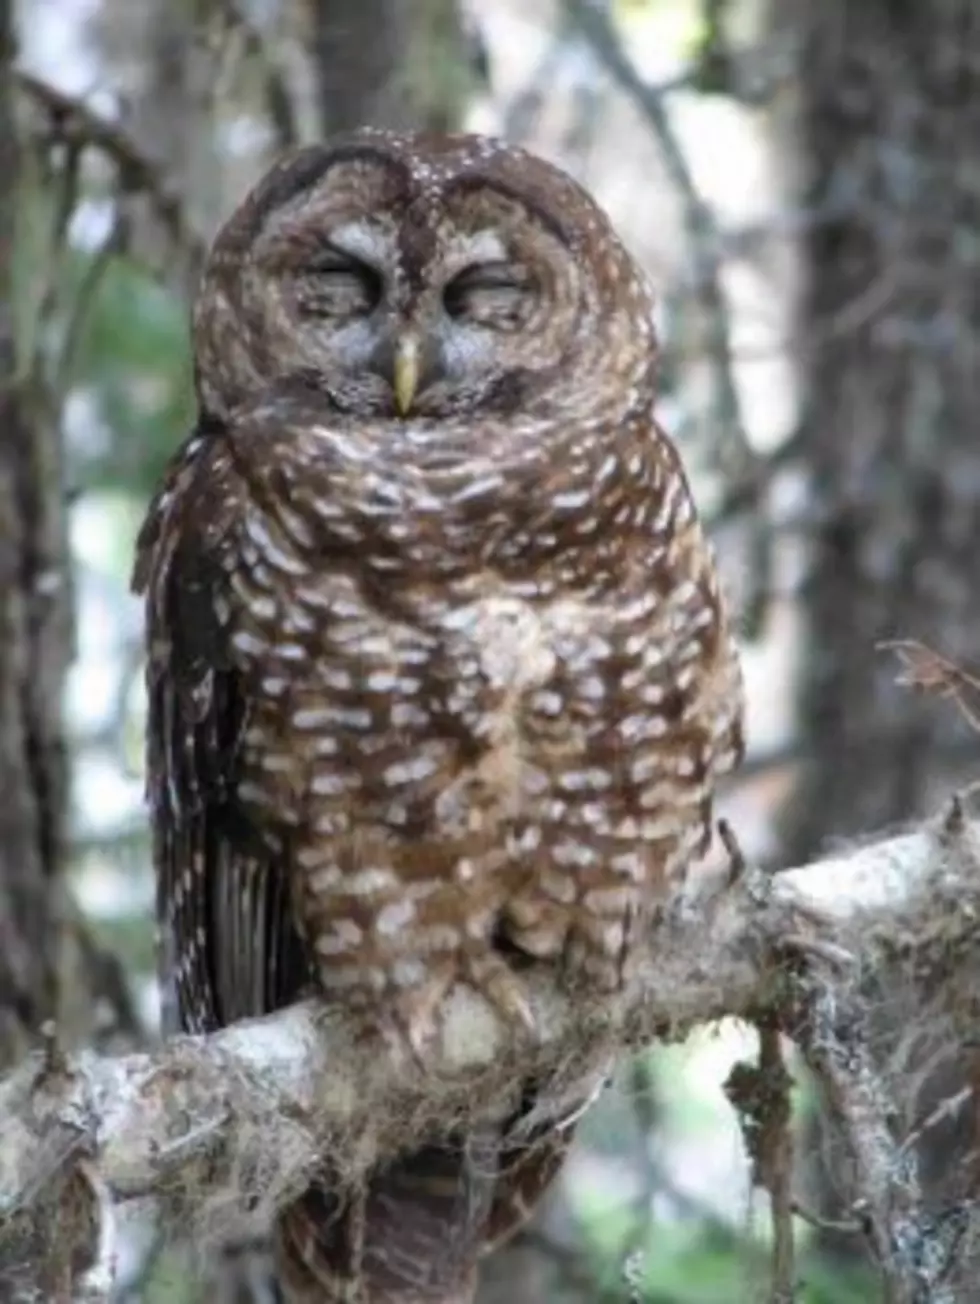 Trump admin cuts 3.5 million acres of habitat for endangered spotted owl